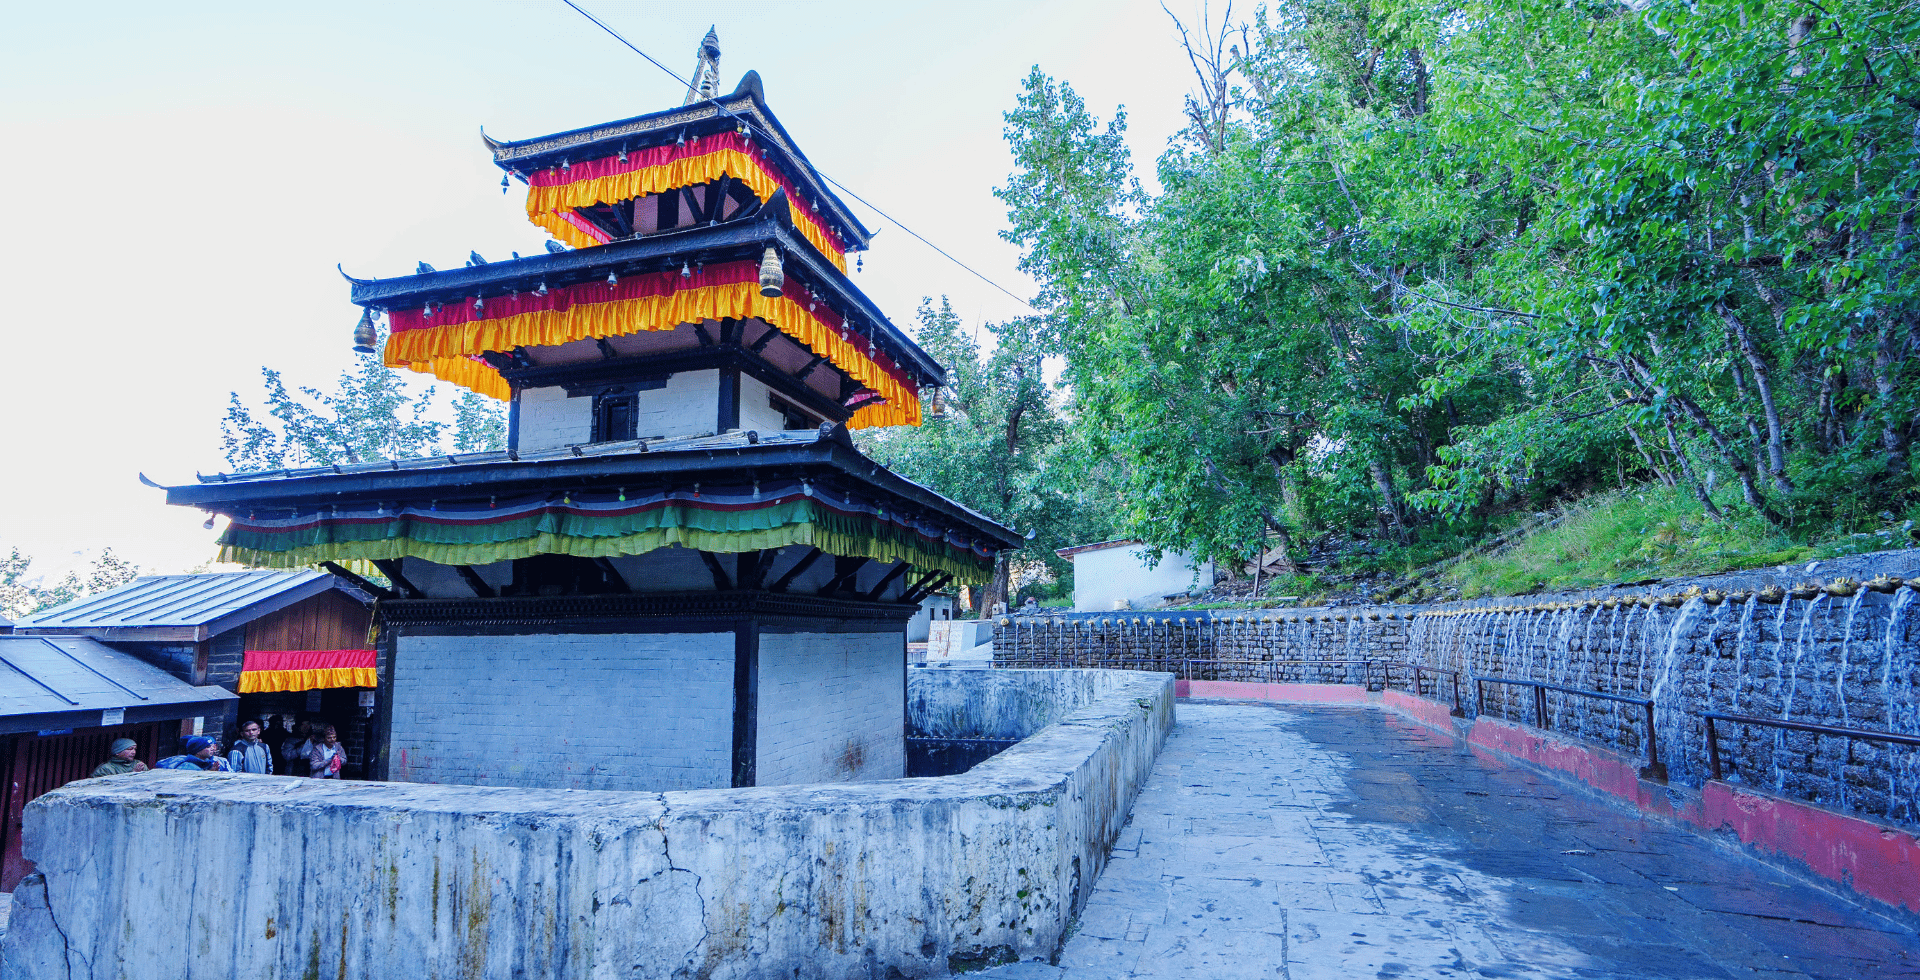 https://www.holidaystonepal.in/media/files/Muktinath/7-days-muktinath-tour-package.png